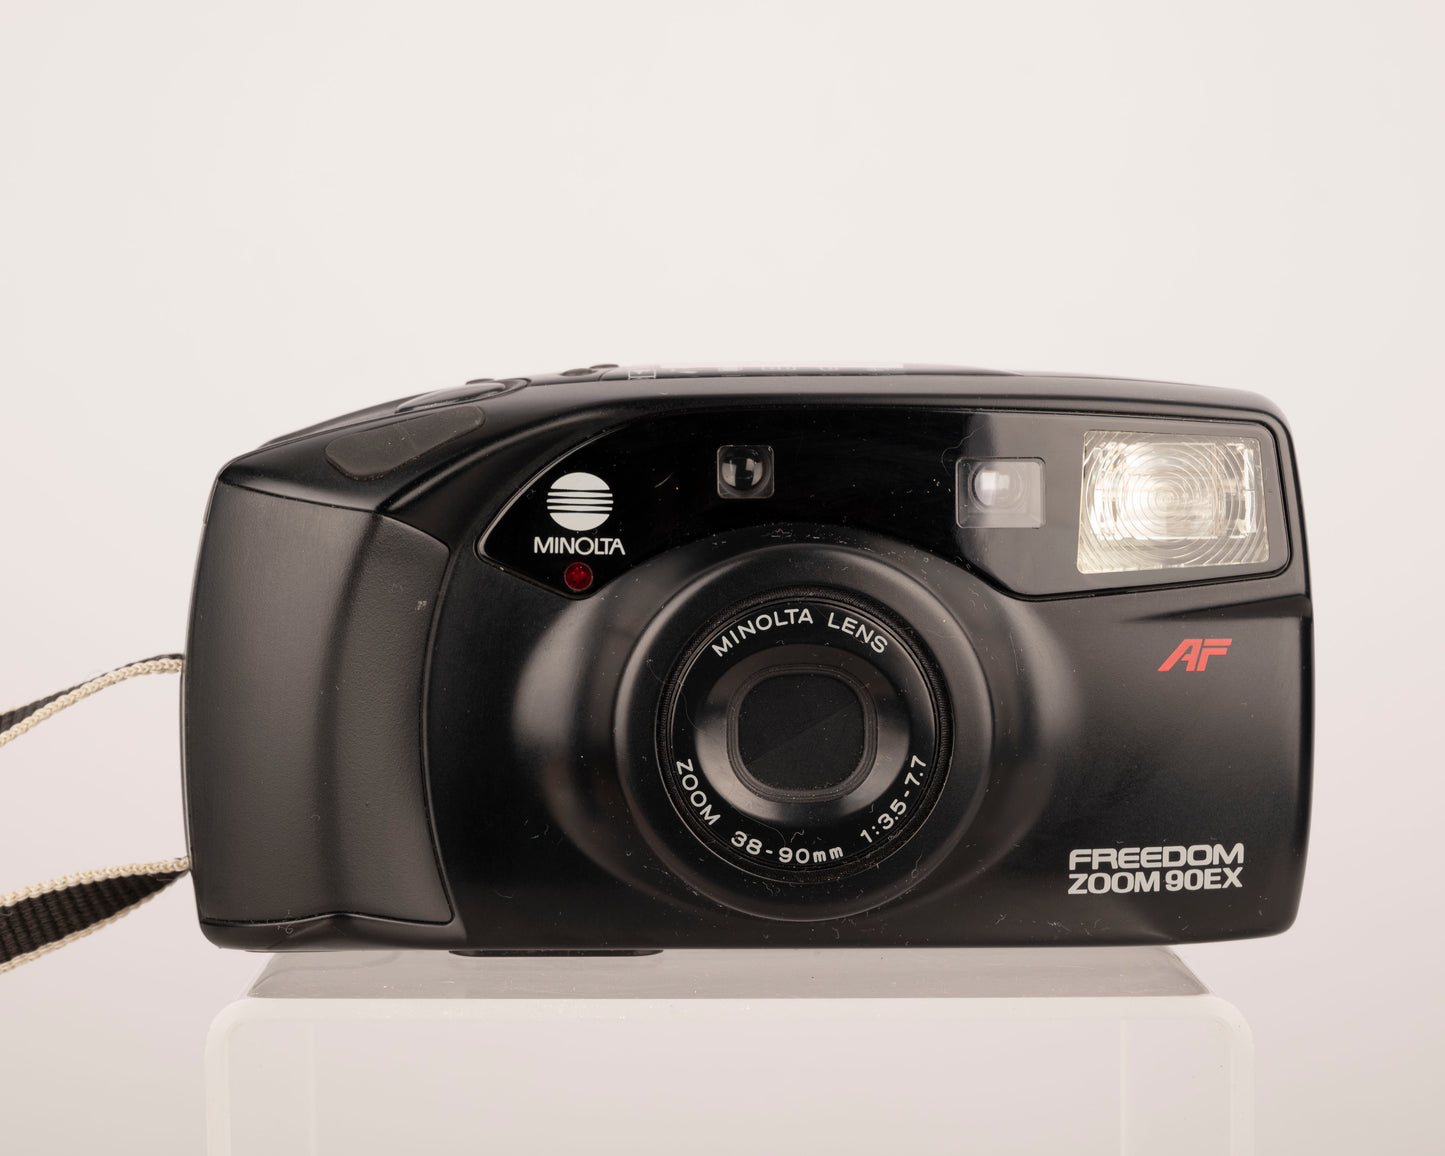 The Minolta Freedom Zoom 90EX is very well-designed 35mm point-and-shoot from the 1990s that shares many design features with the Leica C2-Zoom. 